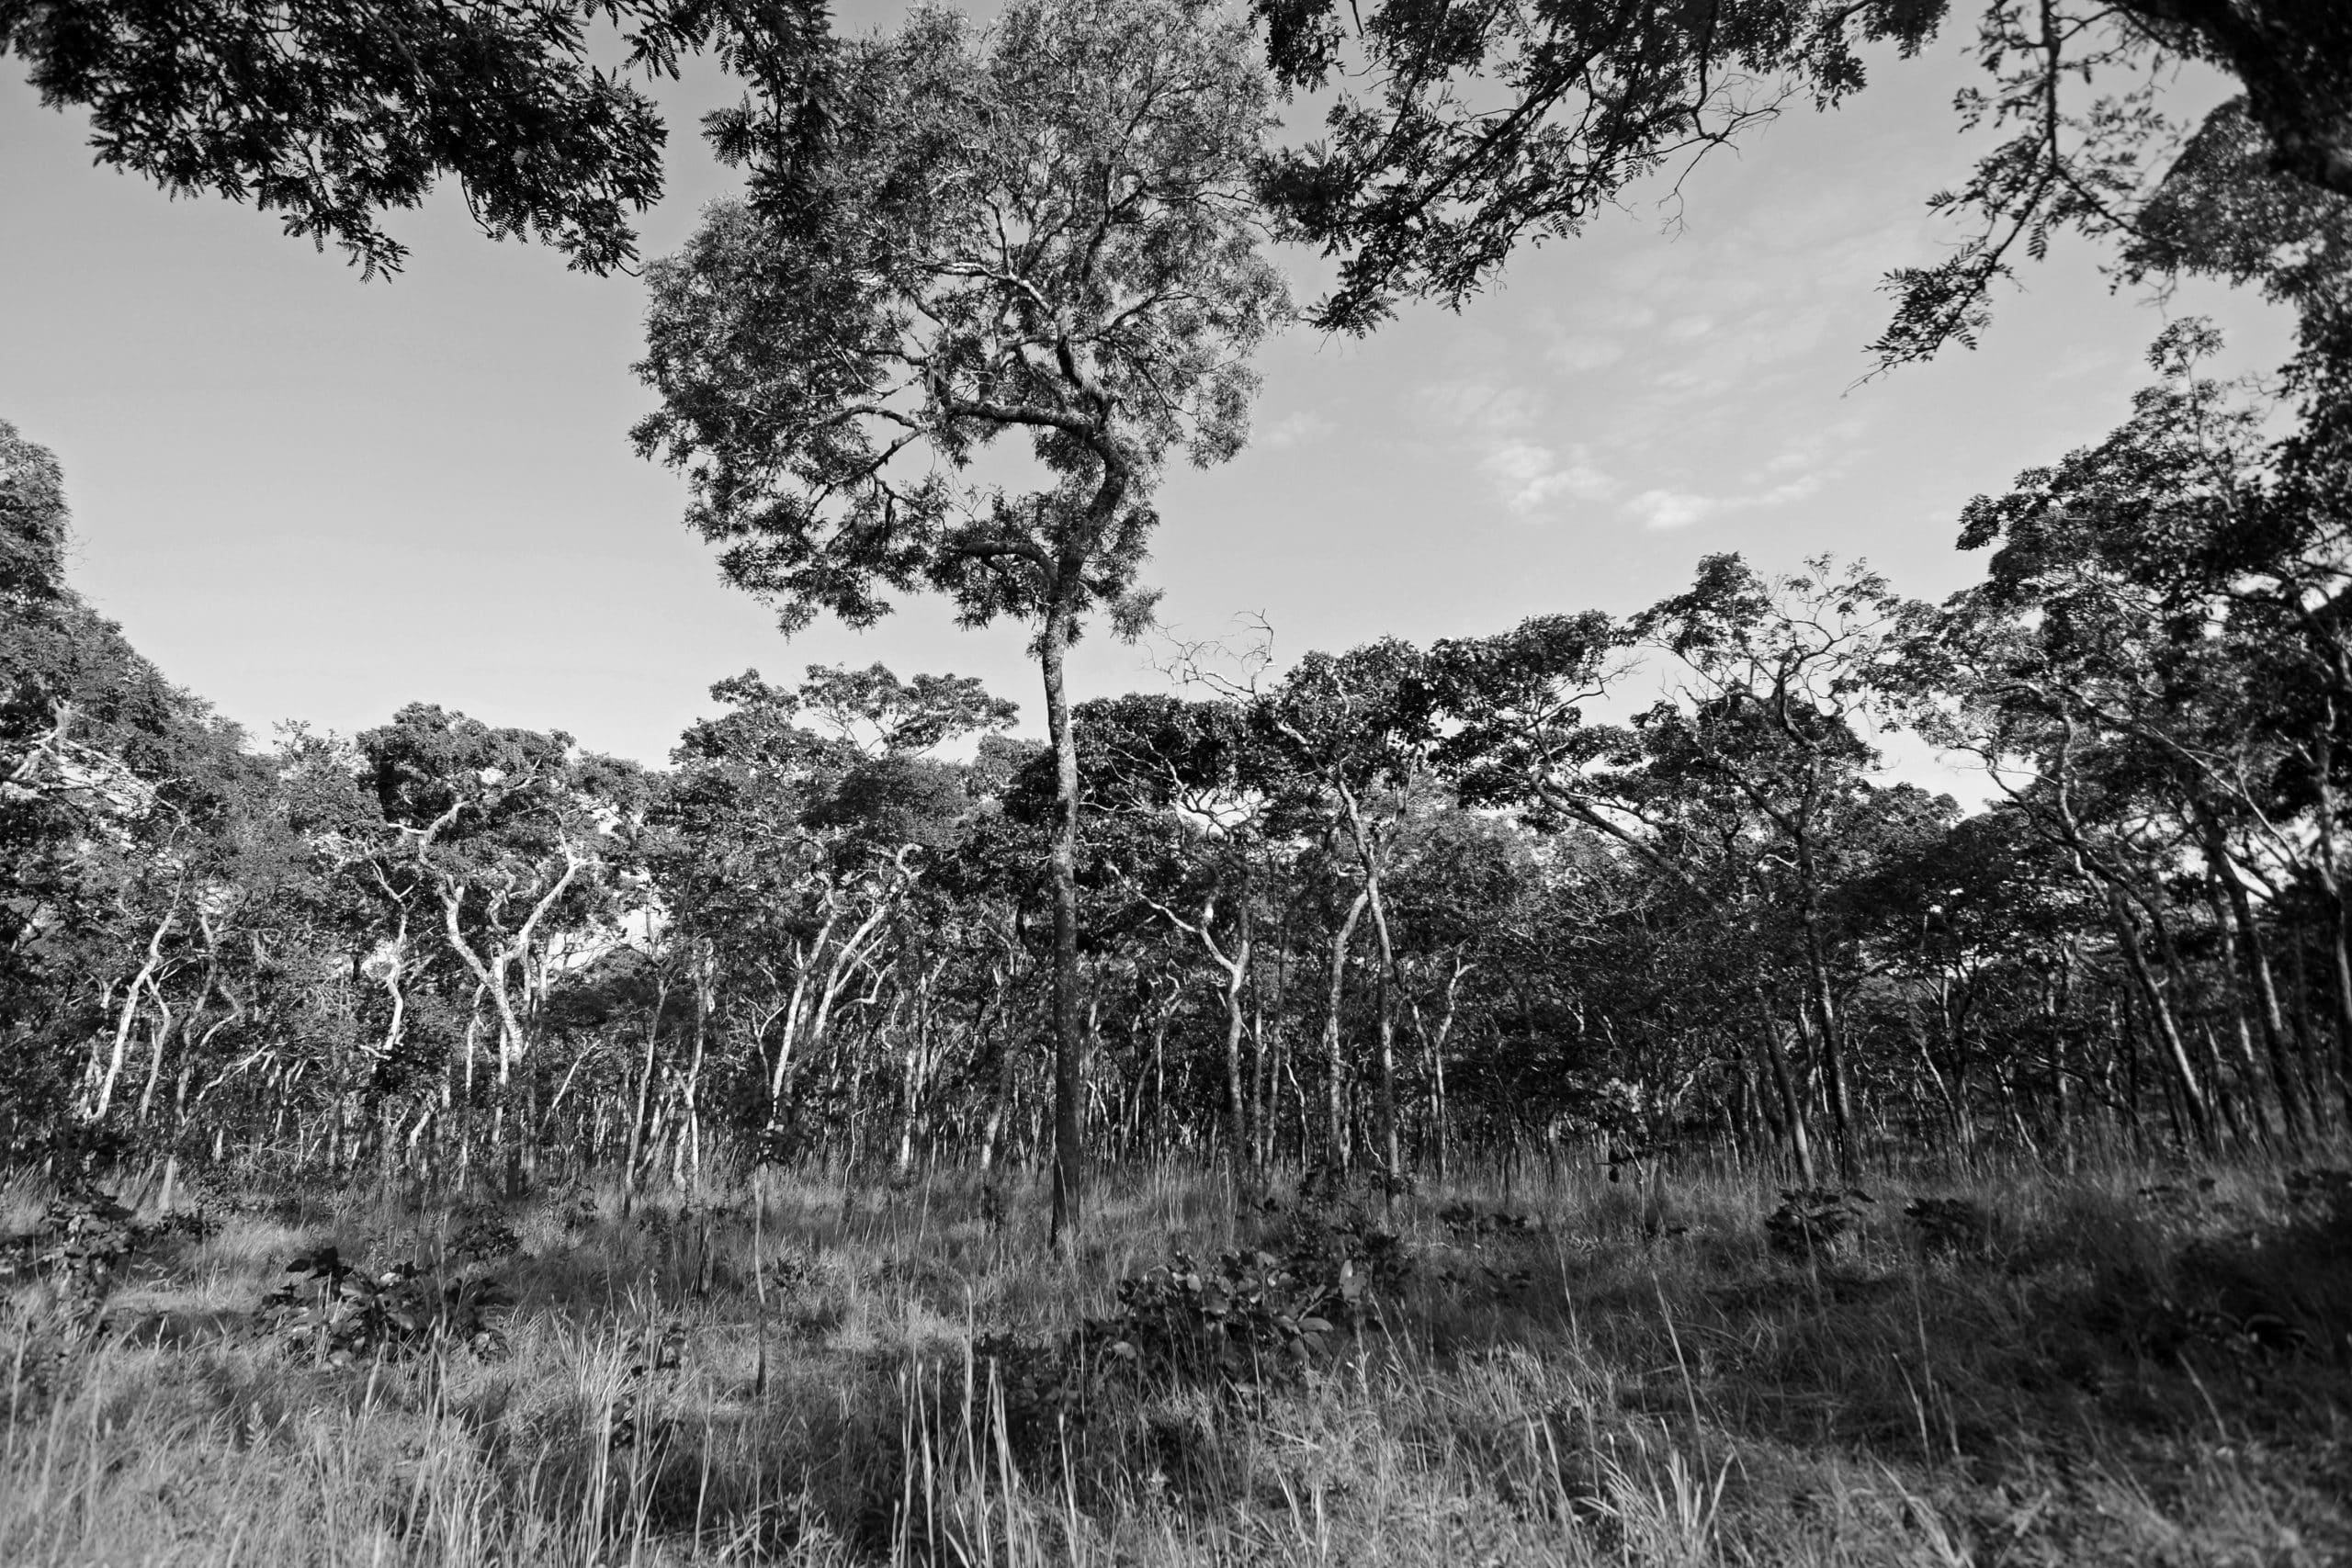 Eastern miombo woodlands